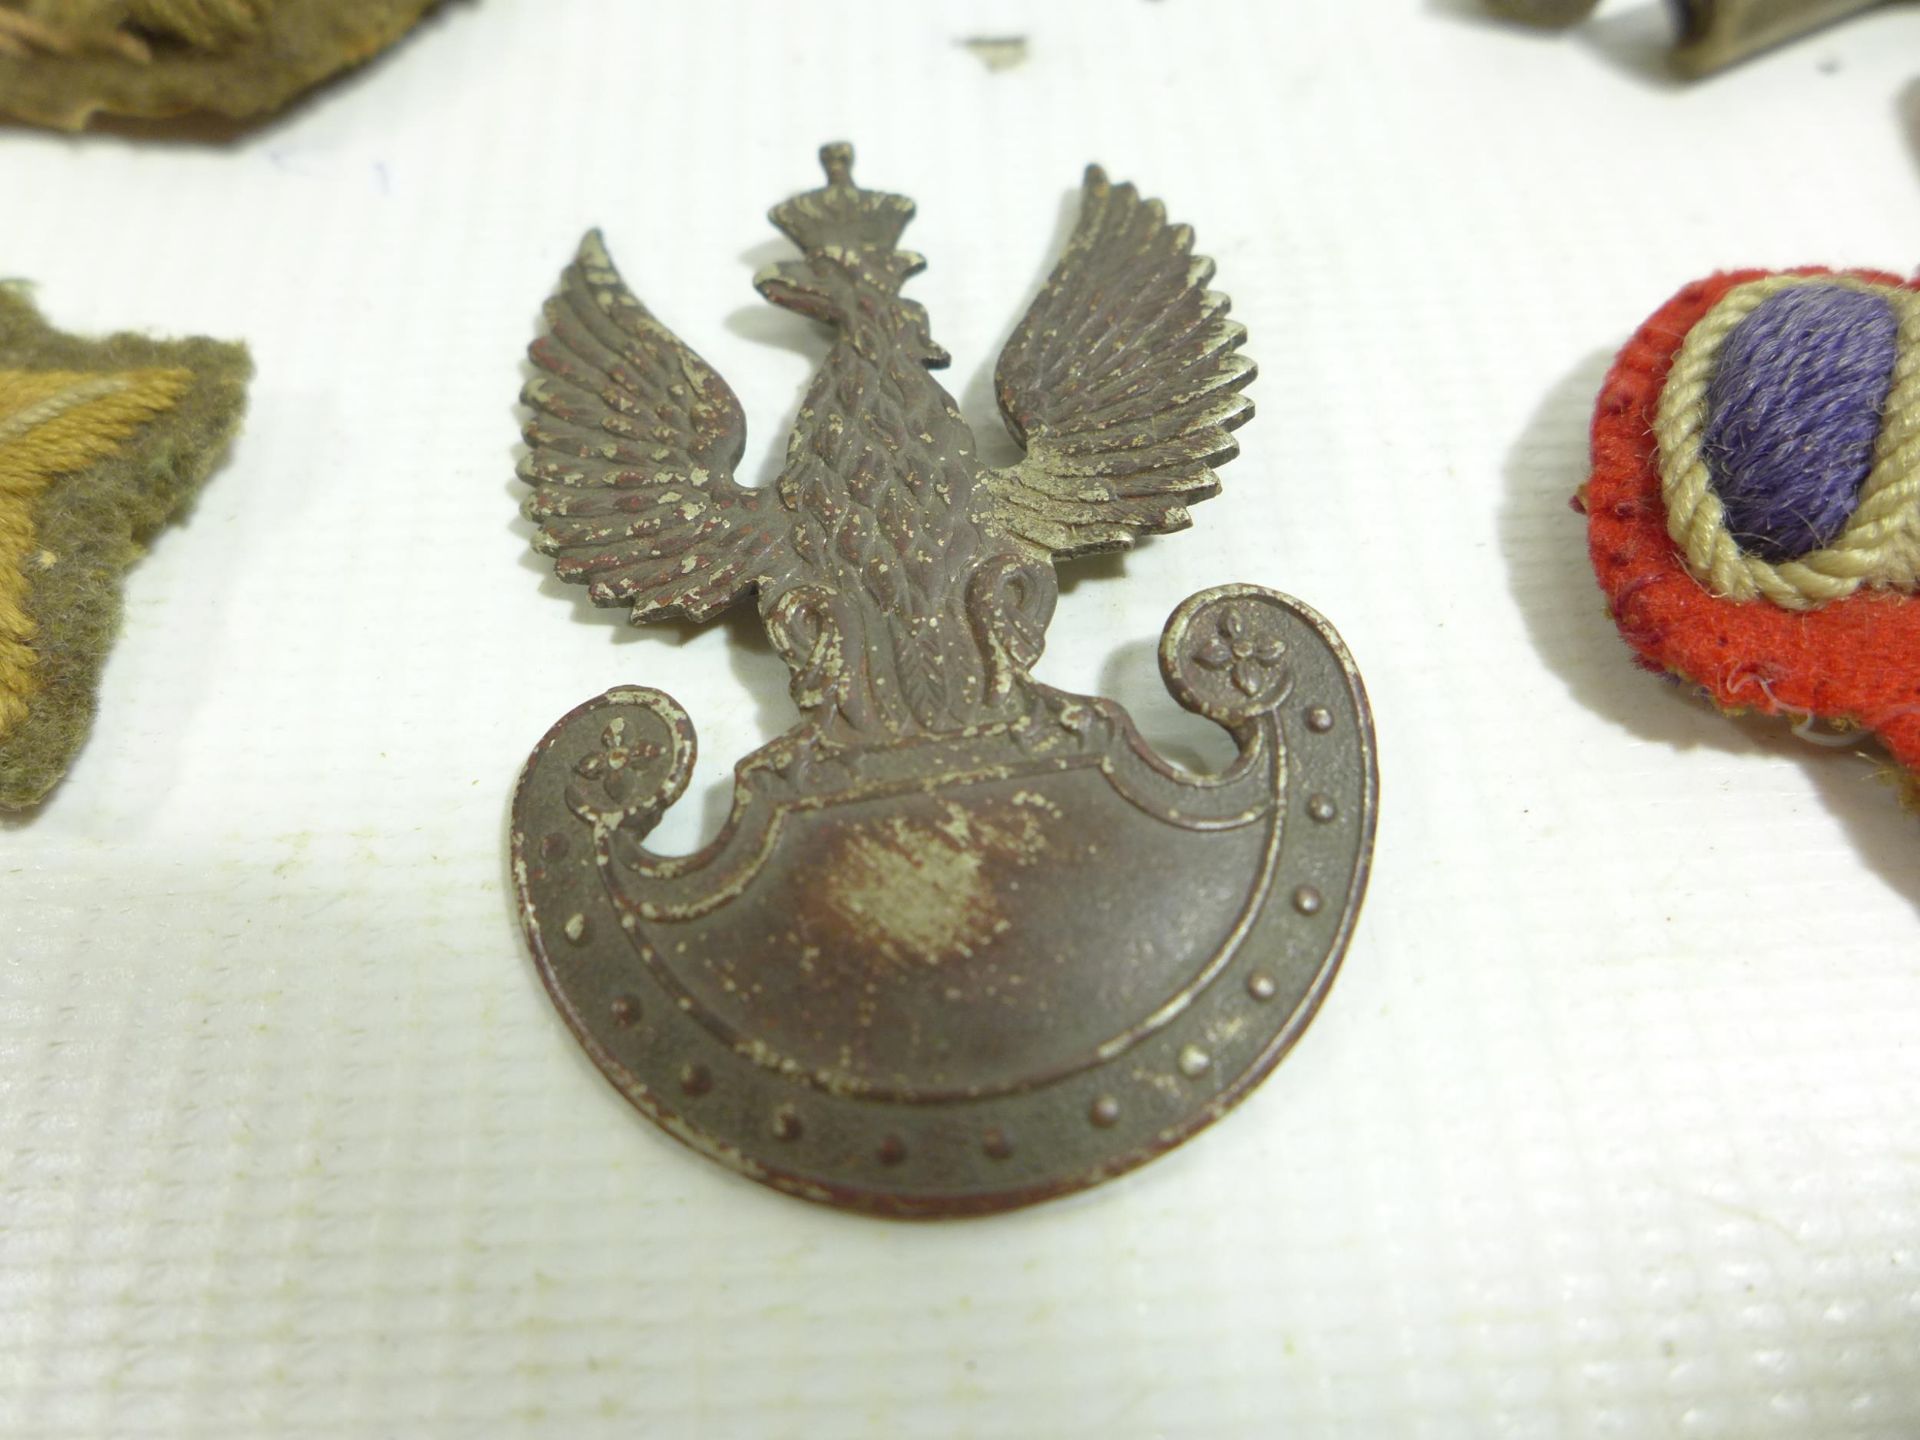 A BOER WAR PERIOD BOX CONTAINING NUMEROUS WORLD WAR I AND WORLD WAR II BADGES TO INCLUDE POLISH ARMY - Image 4 of 8